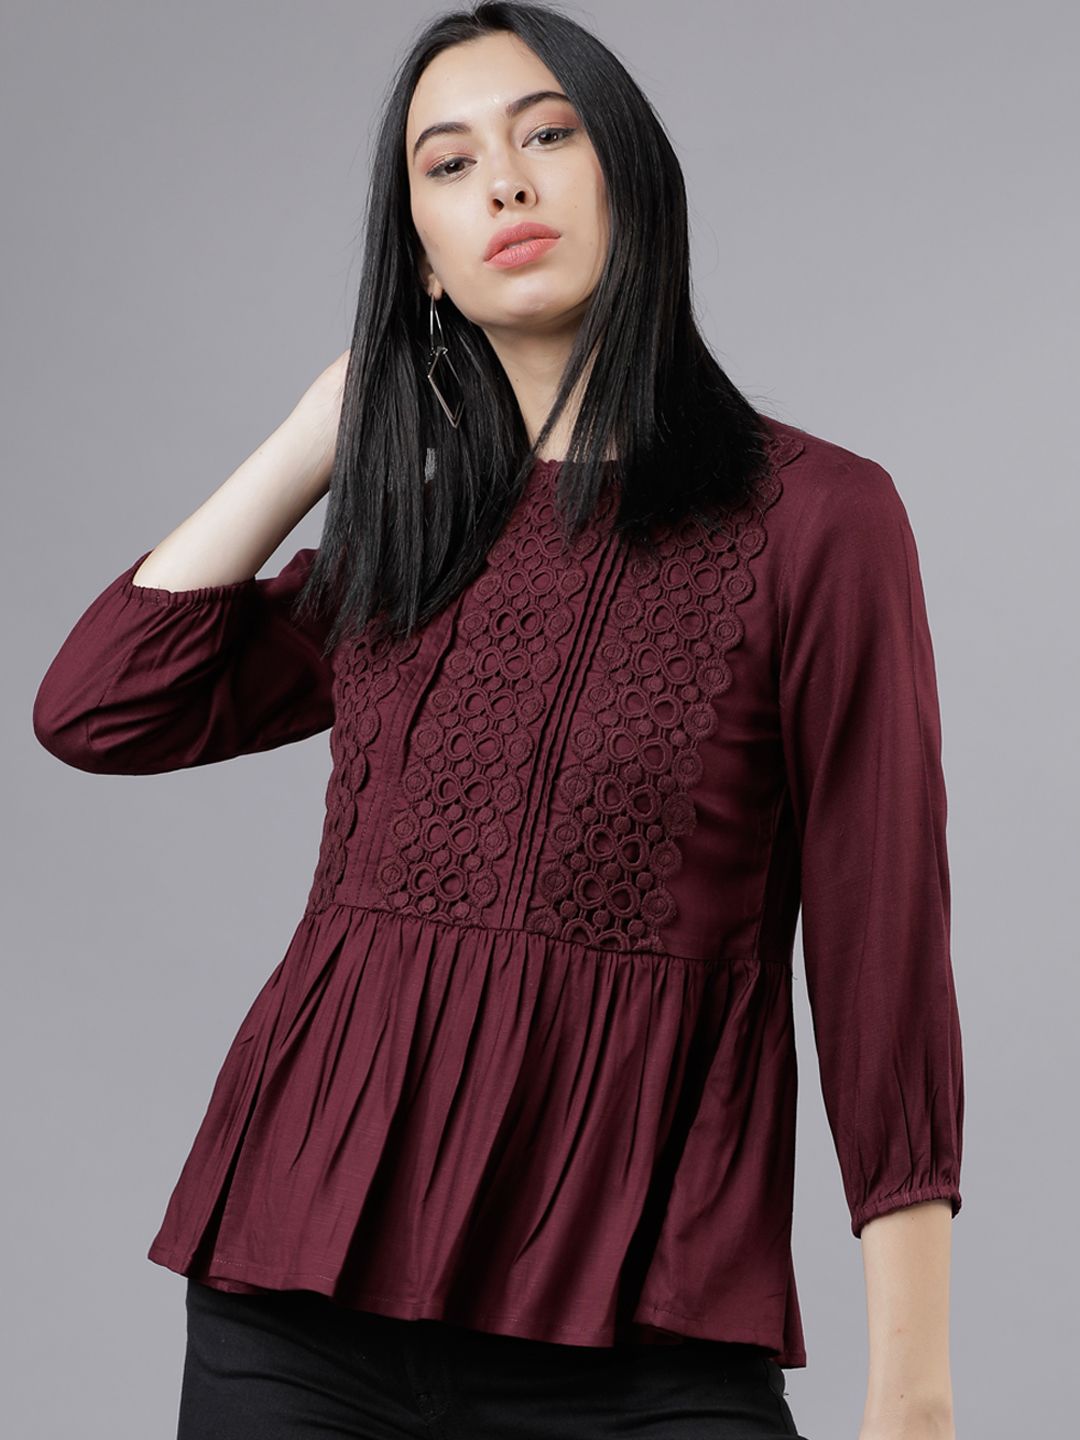 Tokyo Talkies Burgundy Lace Inserts Peplum Top Price in India